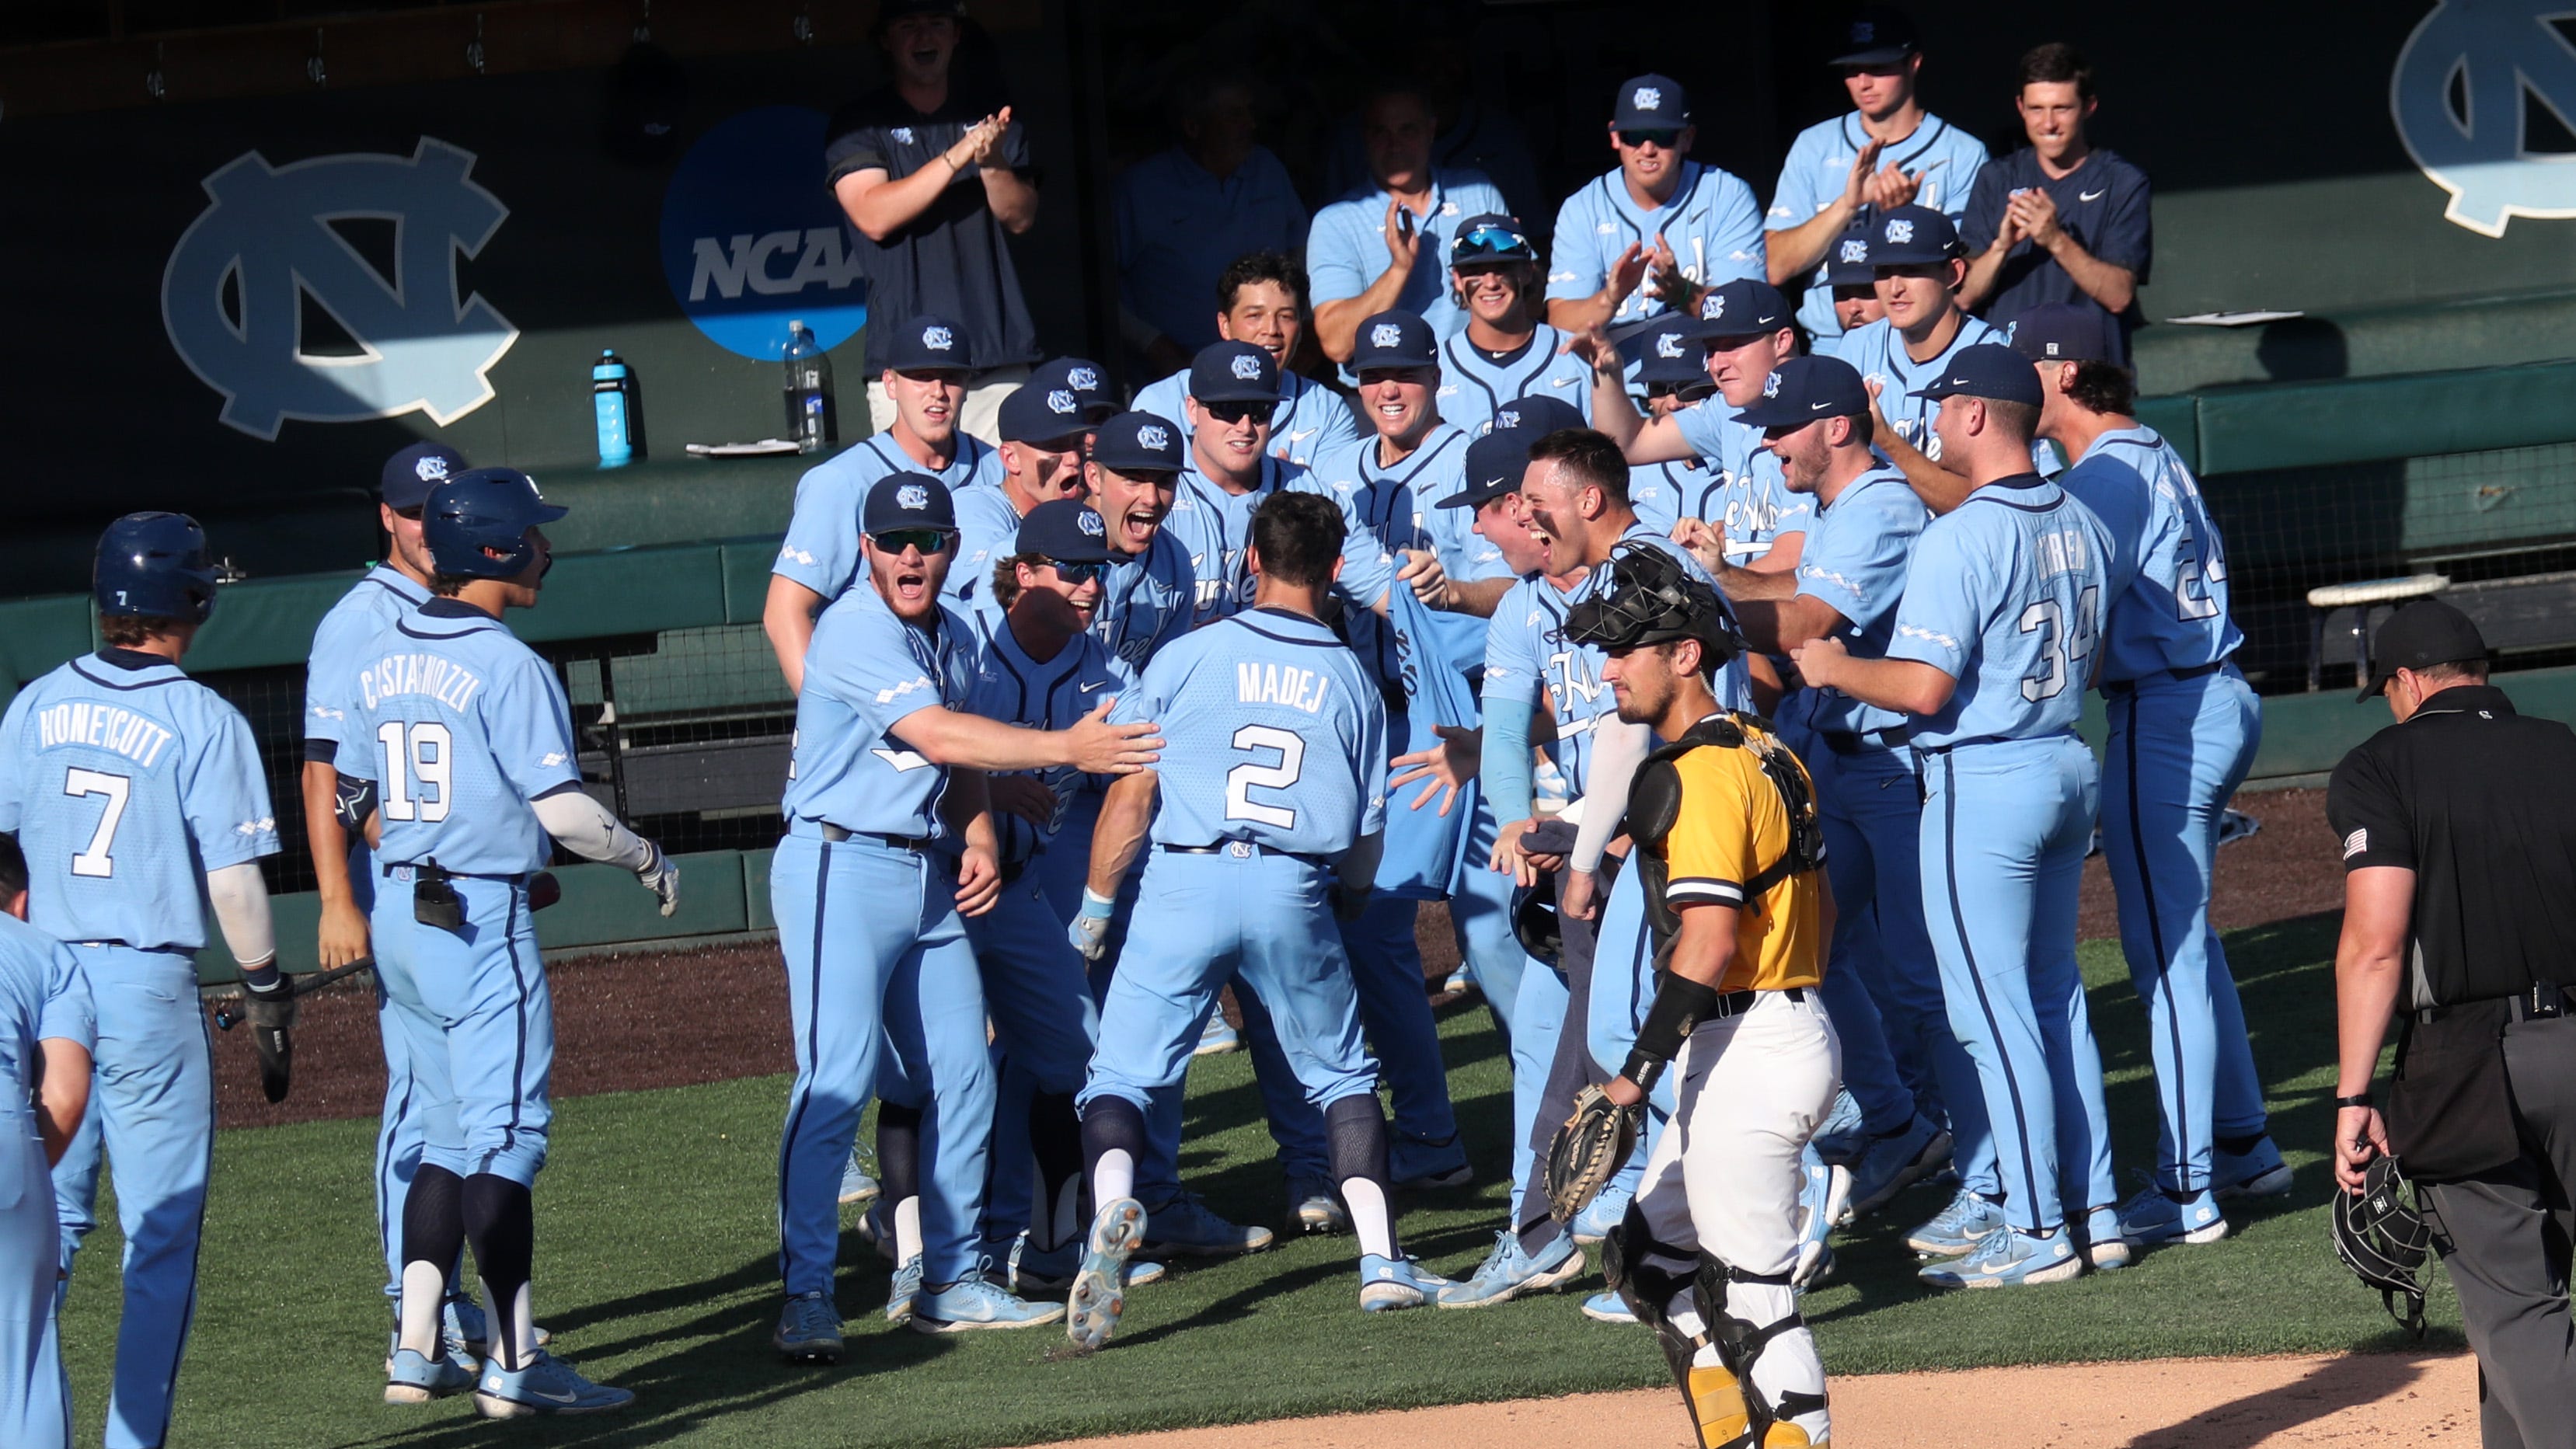 Bosh to the Bigs: UNC MLB Draft Preview with Baseball America's Carlos  Collazo. Plus, Checking In on Tar Heels in Summer Leagues, Pros